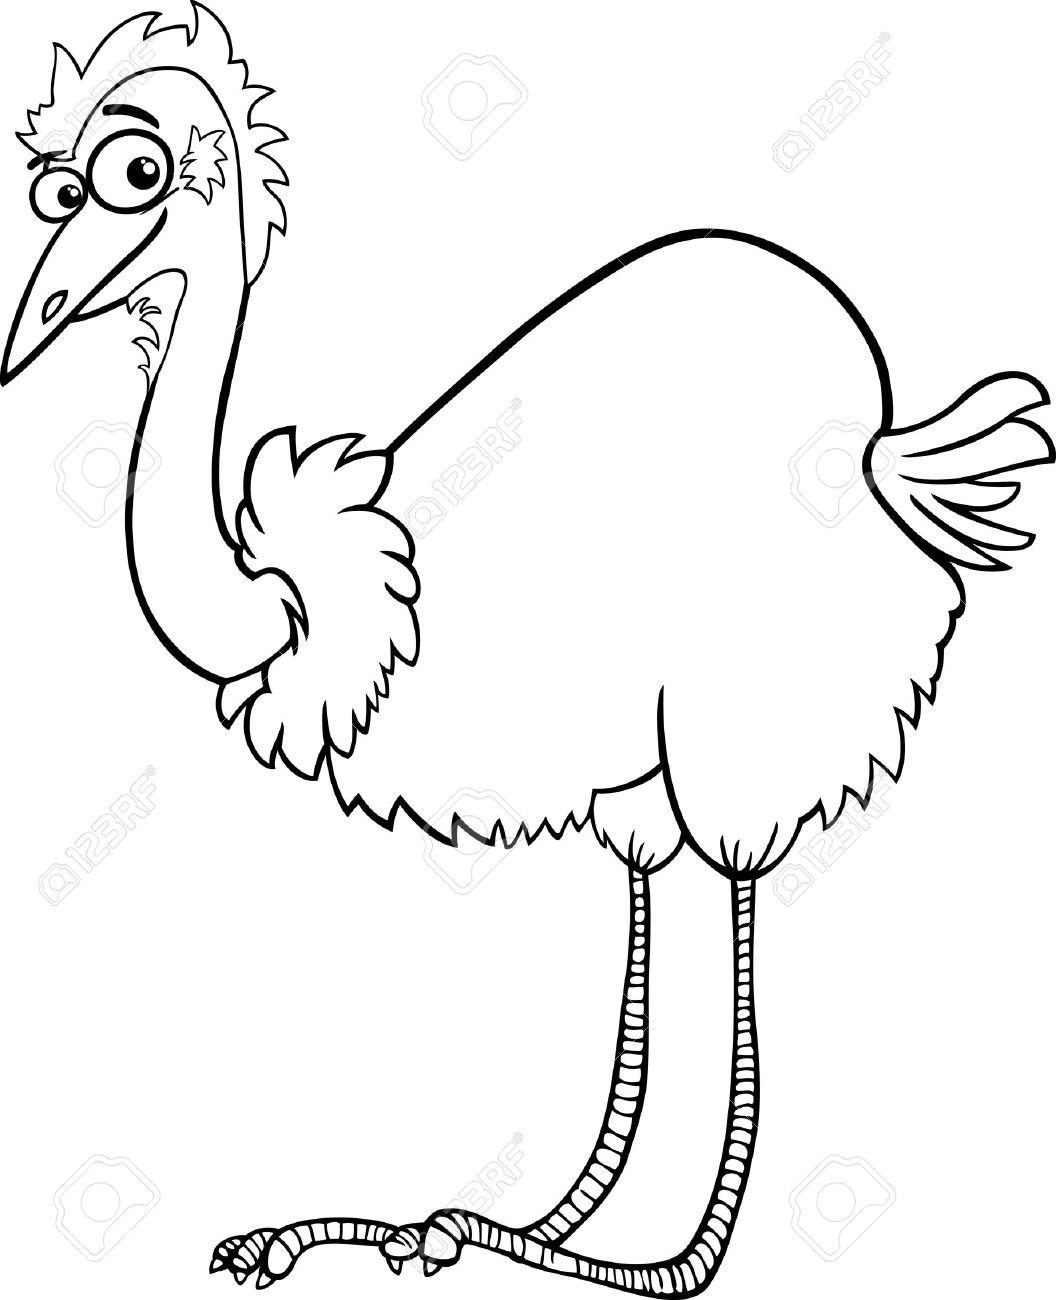 Ostrich clipart black and white 3 » Clipart Station.